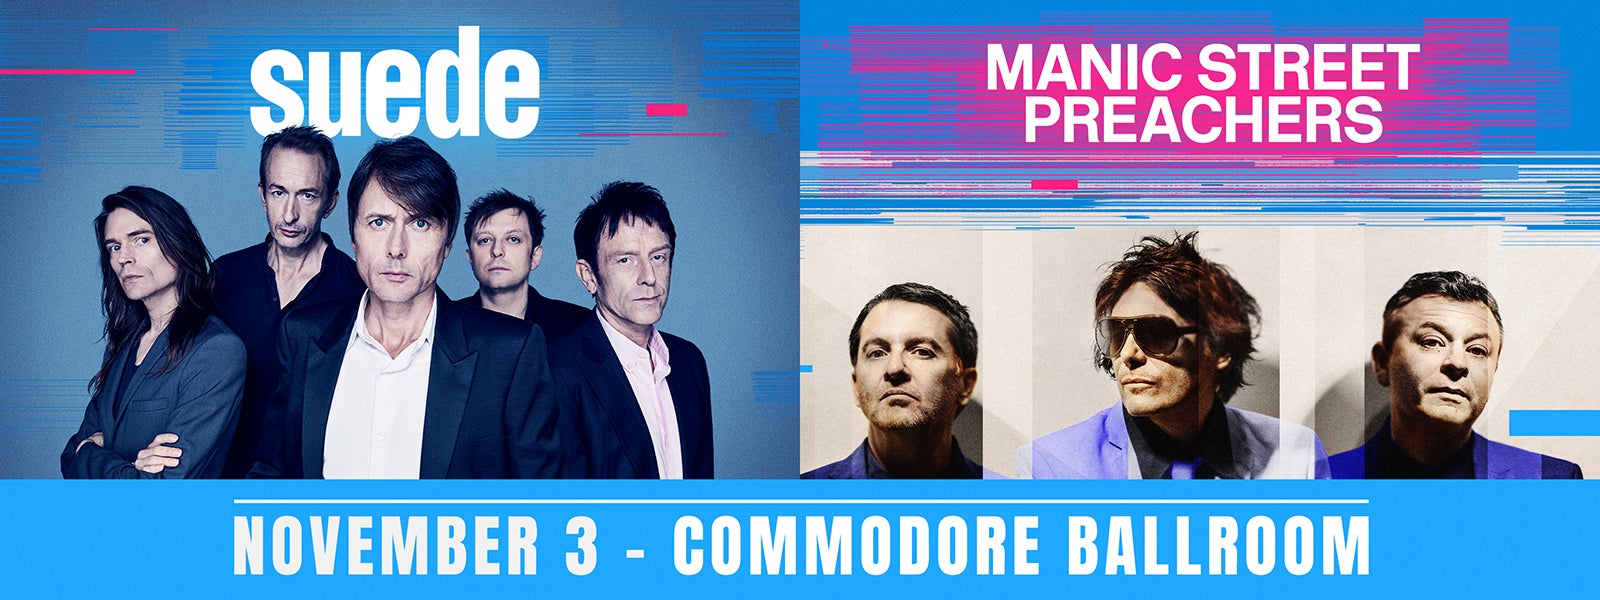 Suede and Manic Street Preachers - New Venue